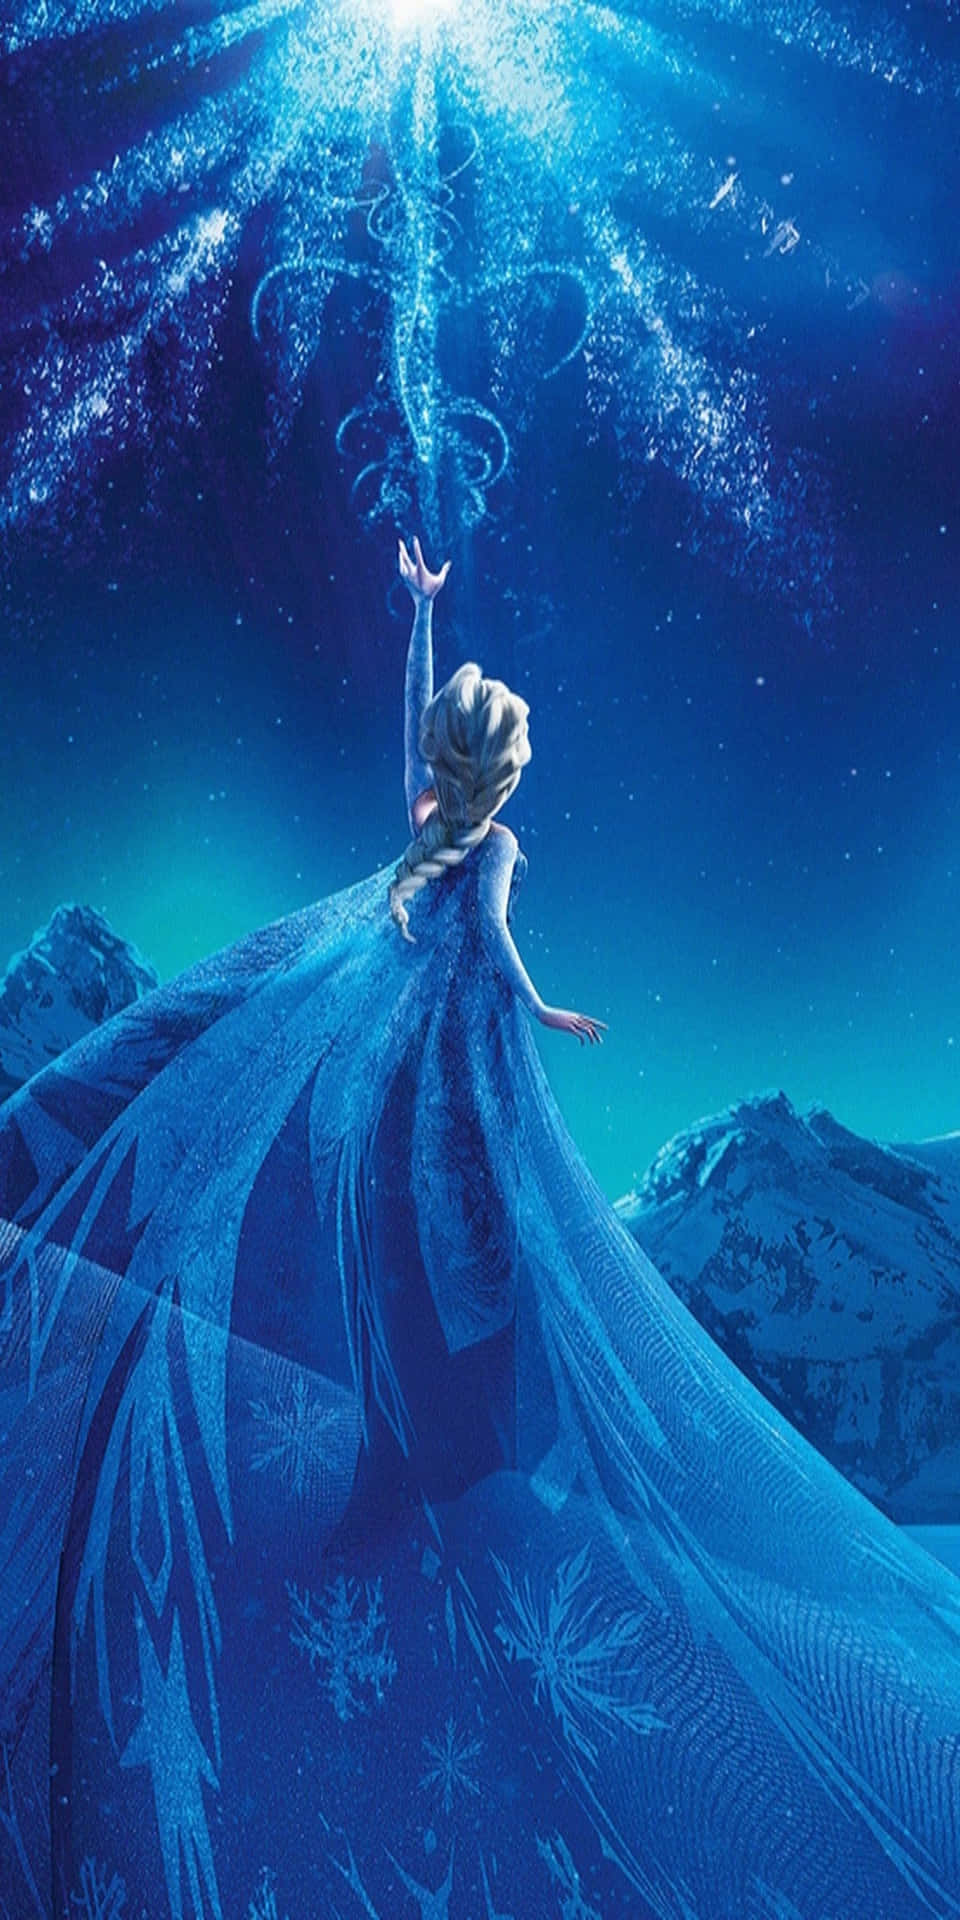 Frozen Movie Poster With Elsa In Blue Dress